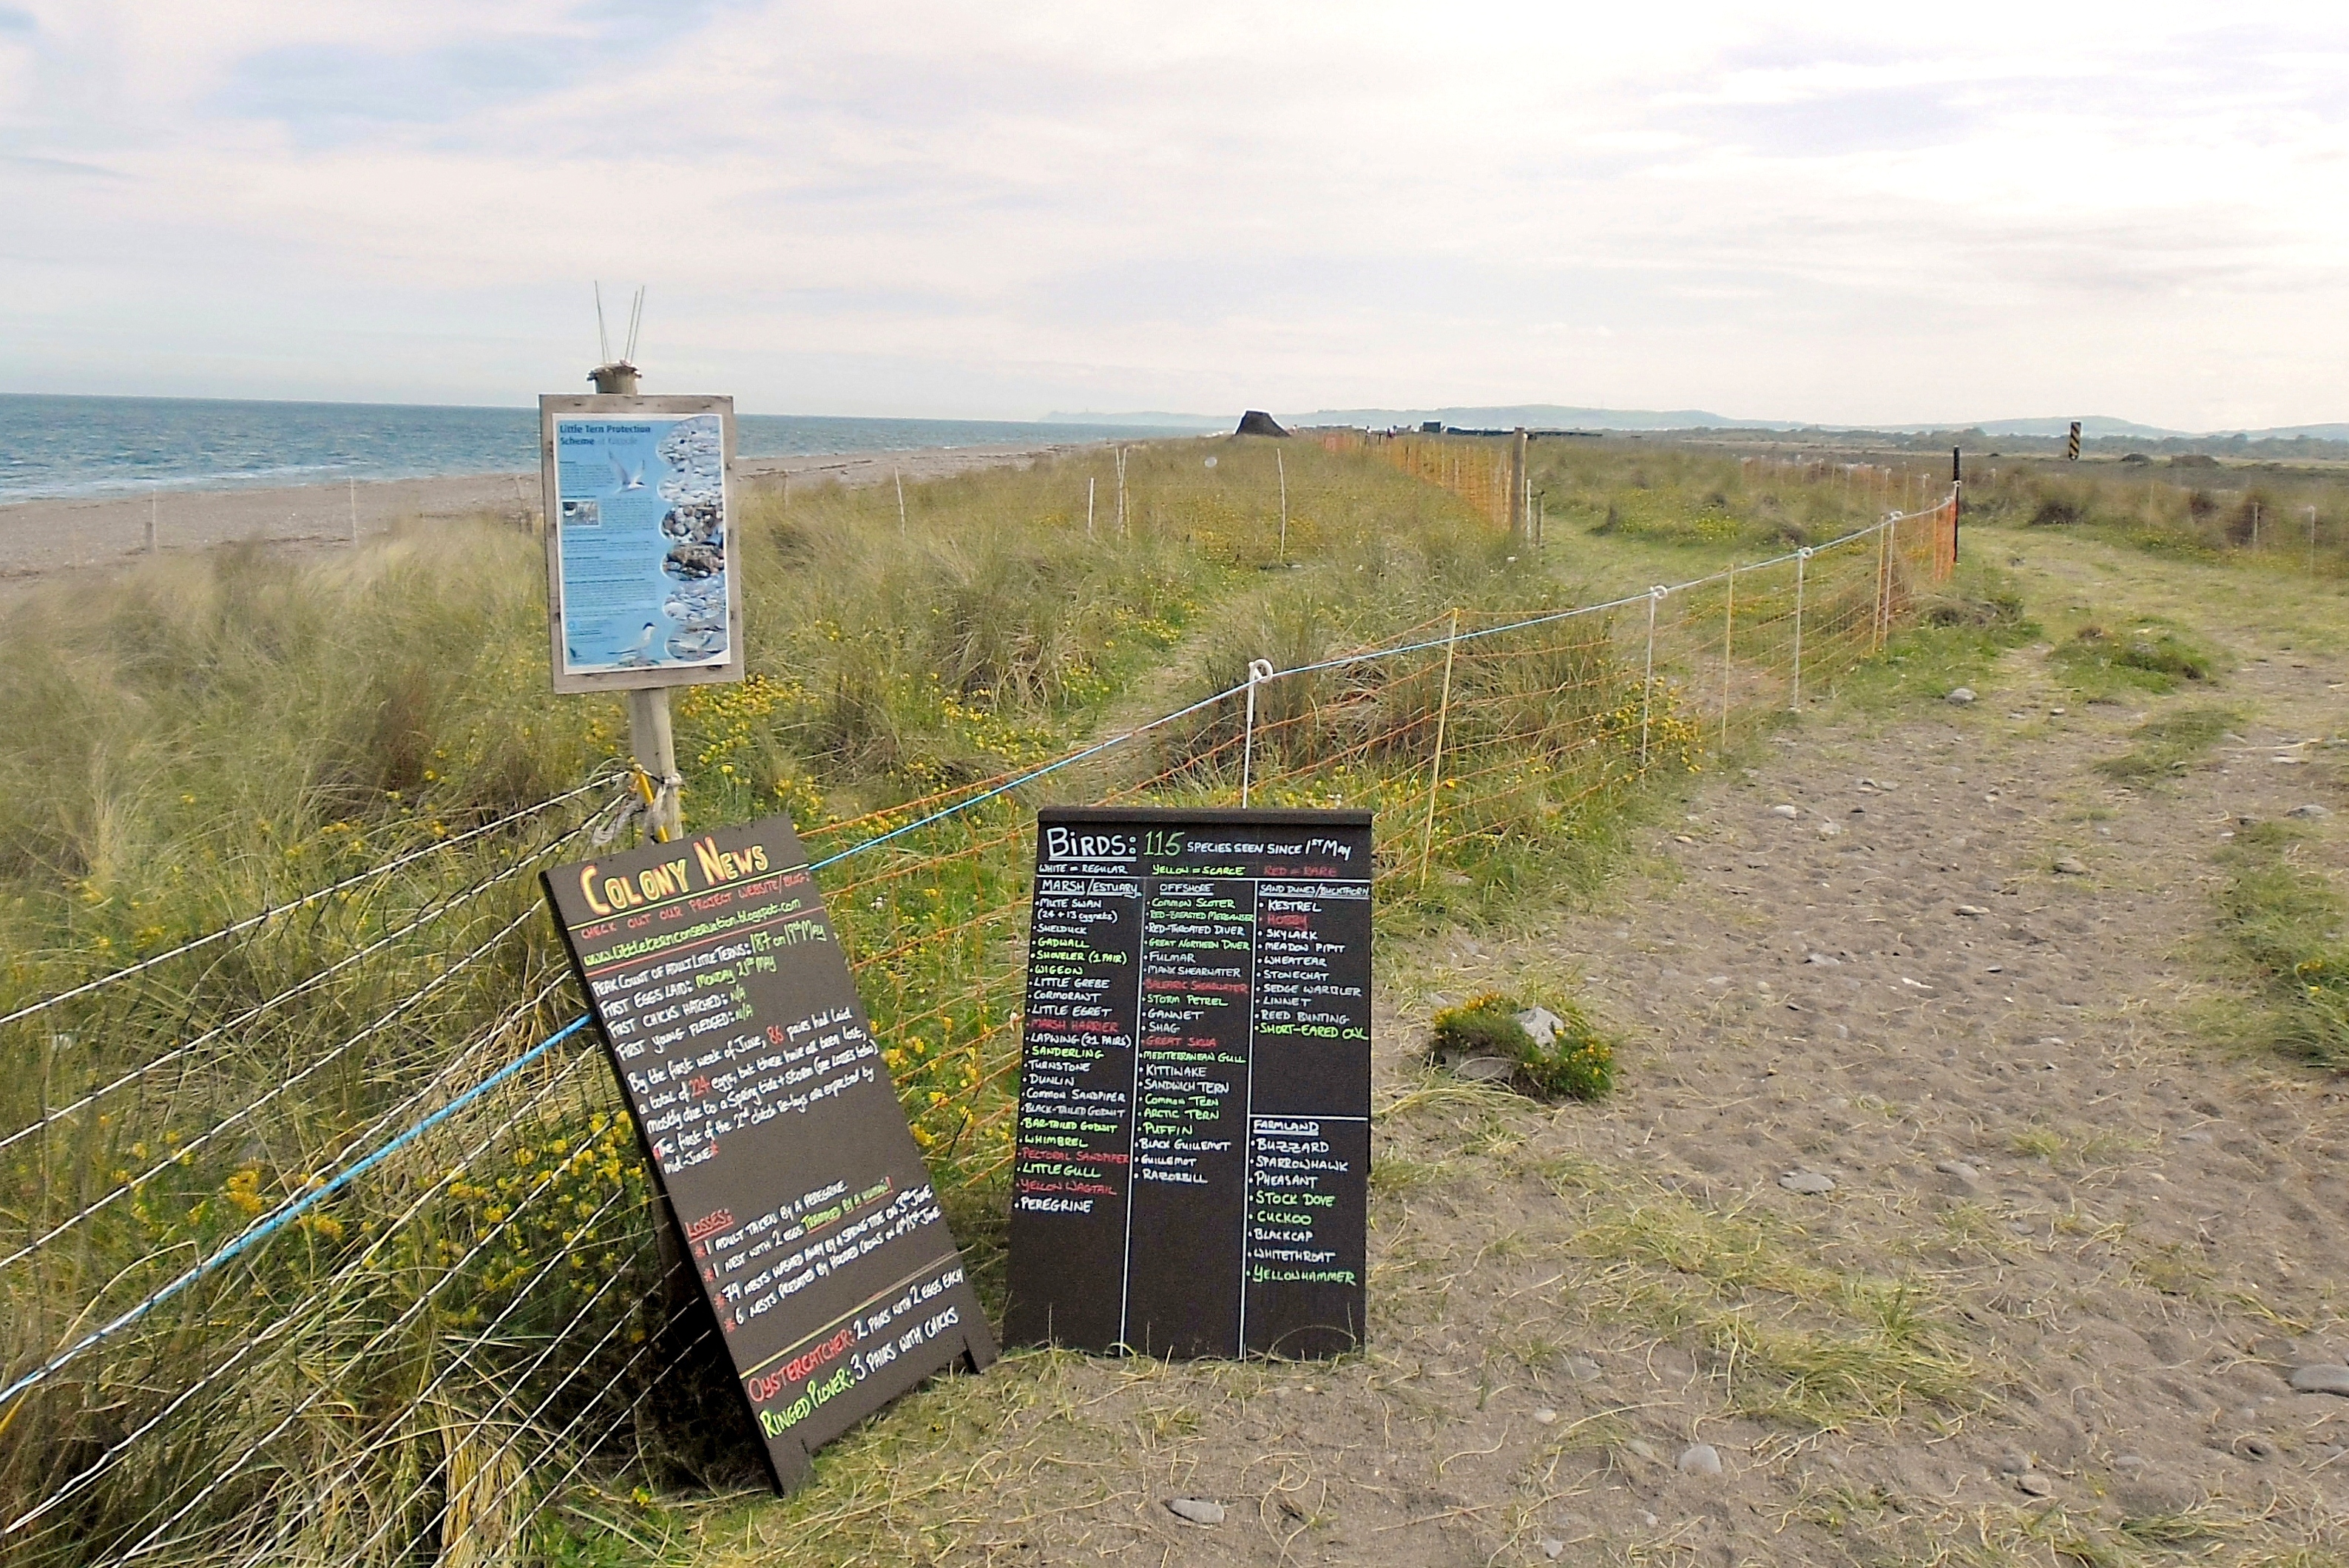 Kilcoole-little-tern-conservation-project-with-information-signs-and-electric-fencing-on-shingle-beach